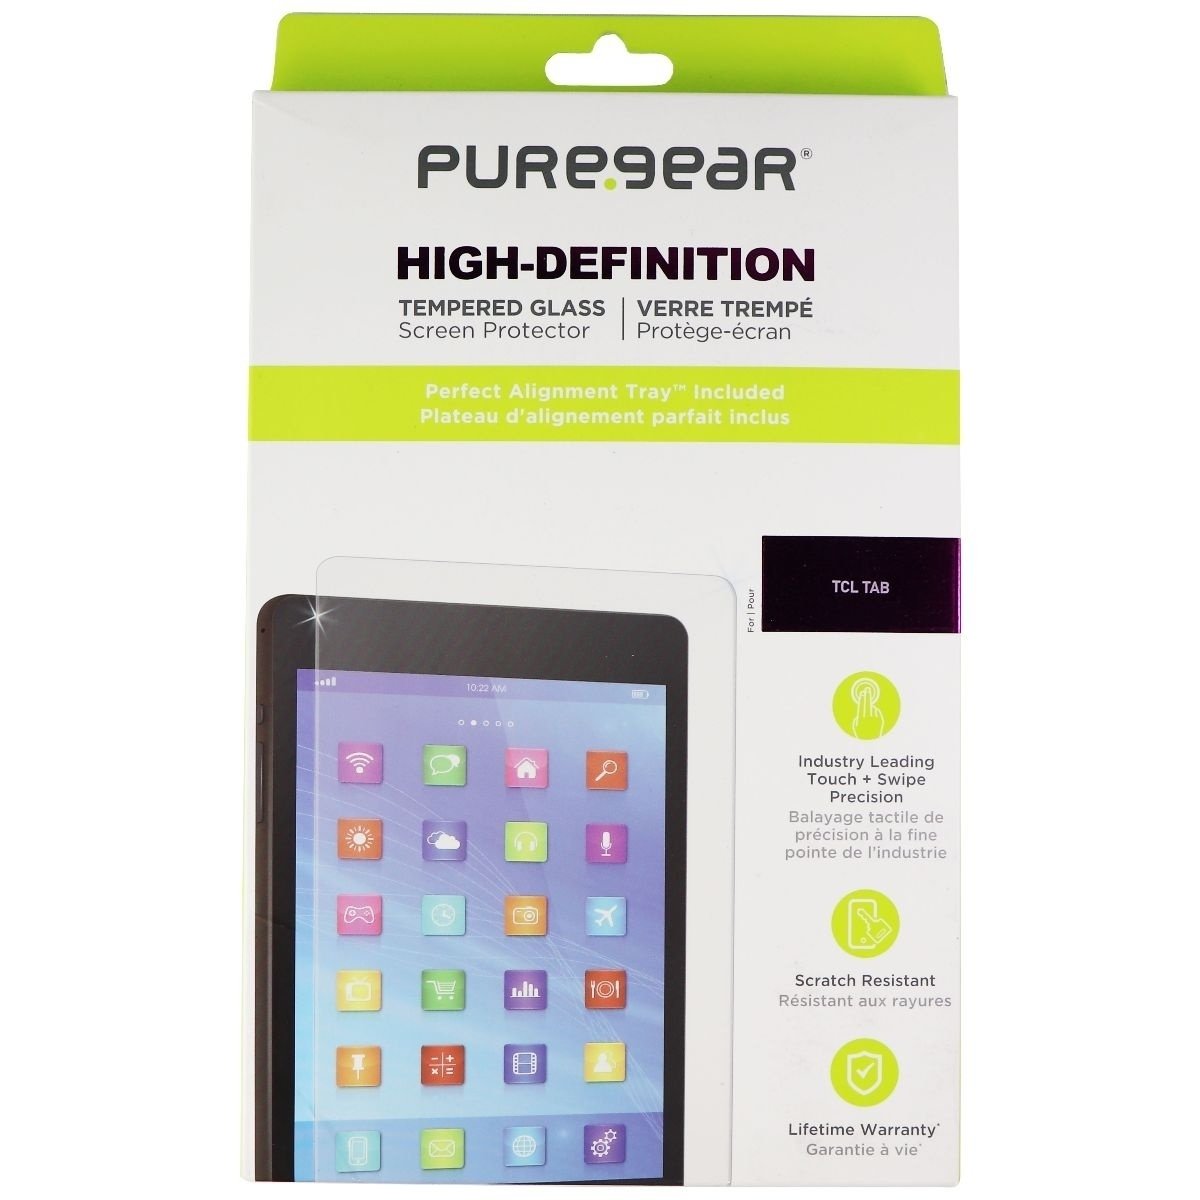 PureGear High-Definition Tempered Glass For TCL Tab - Clear